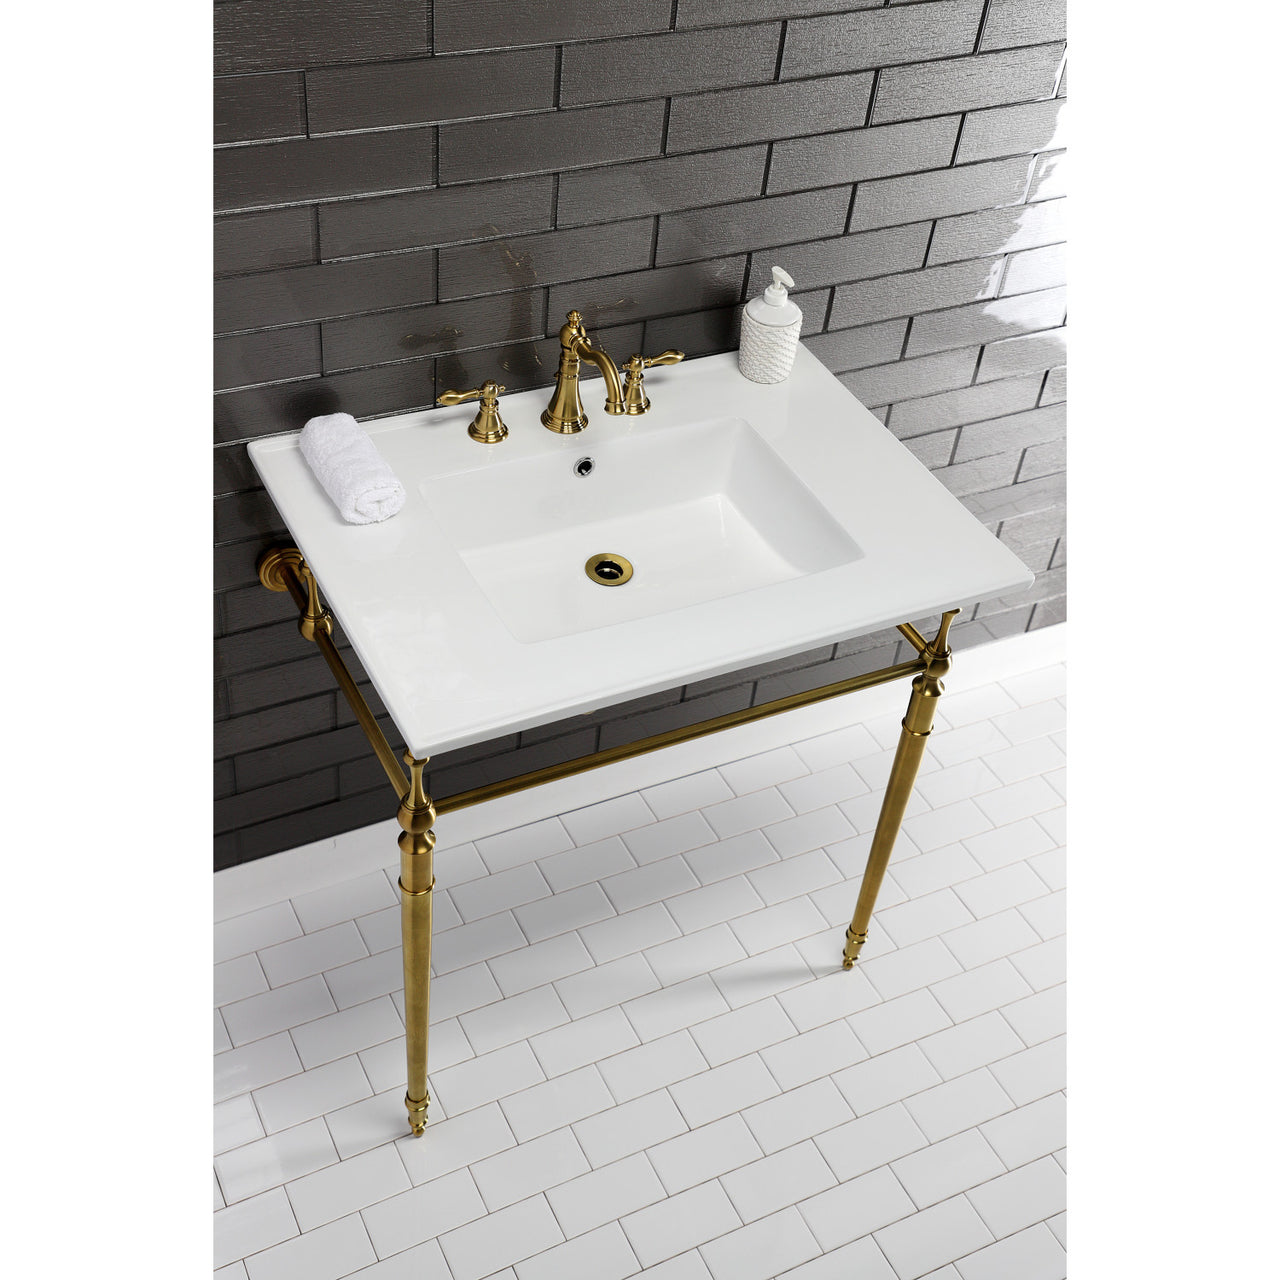 Continental 31 x 22 Ceramic Vanity Top W/ 3 Holes & Integrated Basin - BNGBath